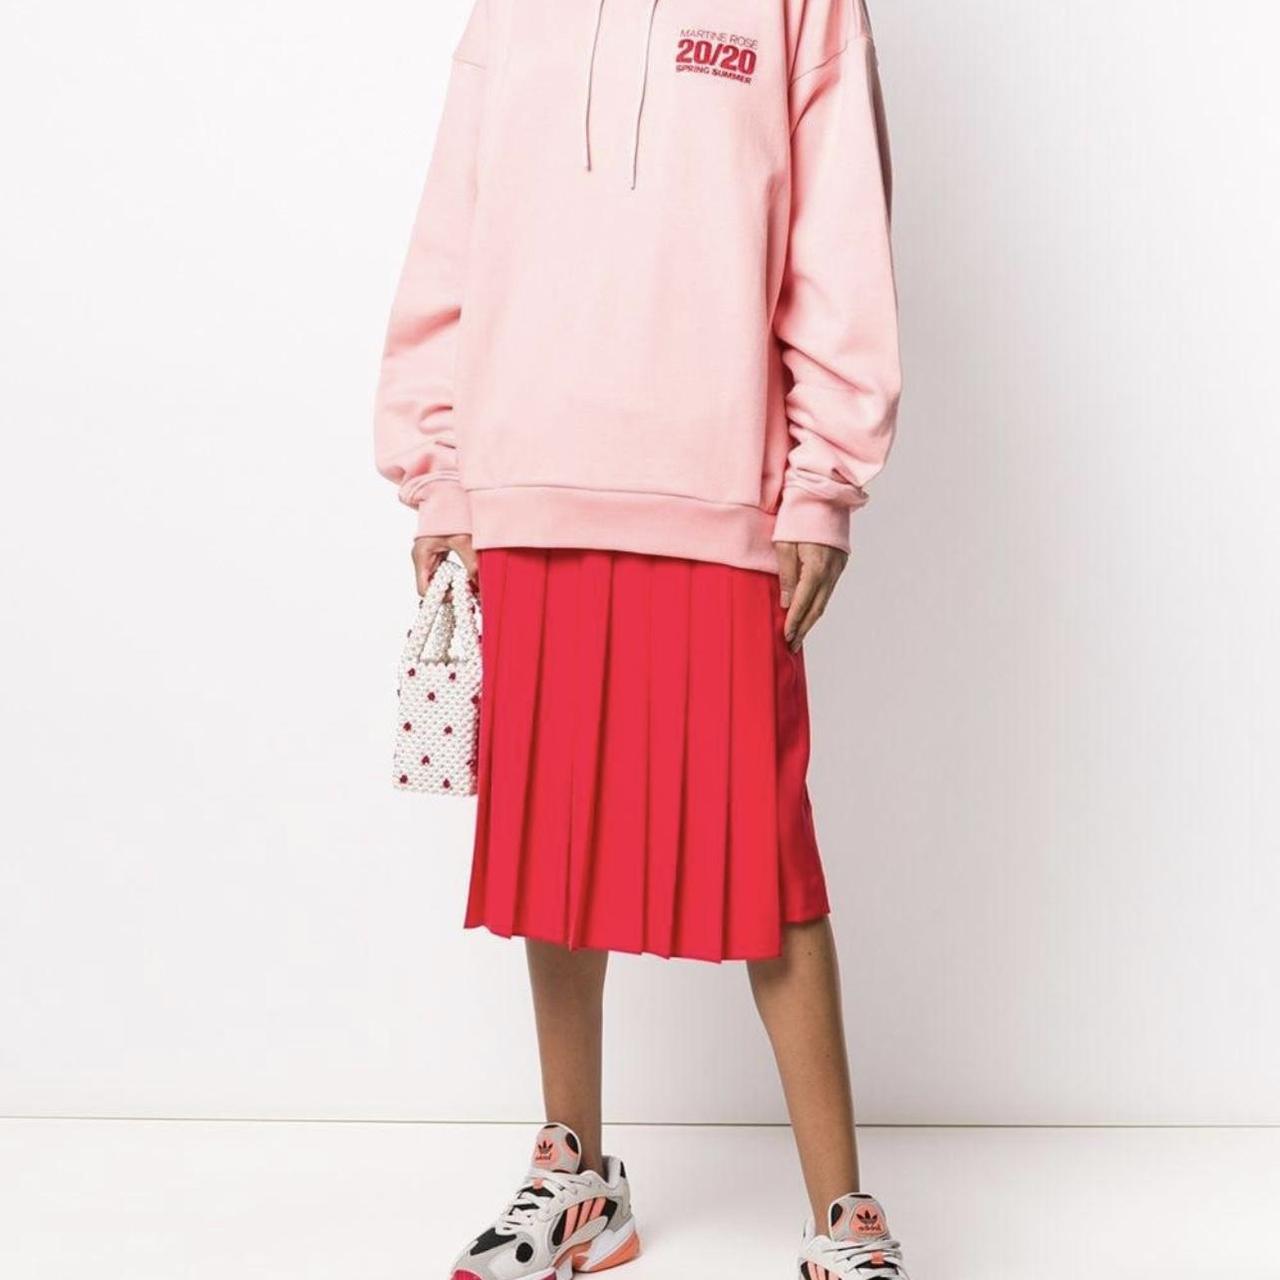 Product Image 2 - Martine Rose Hoodie. Size S.